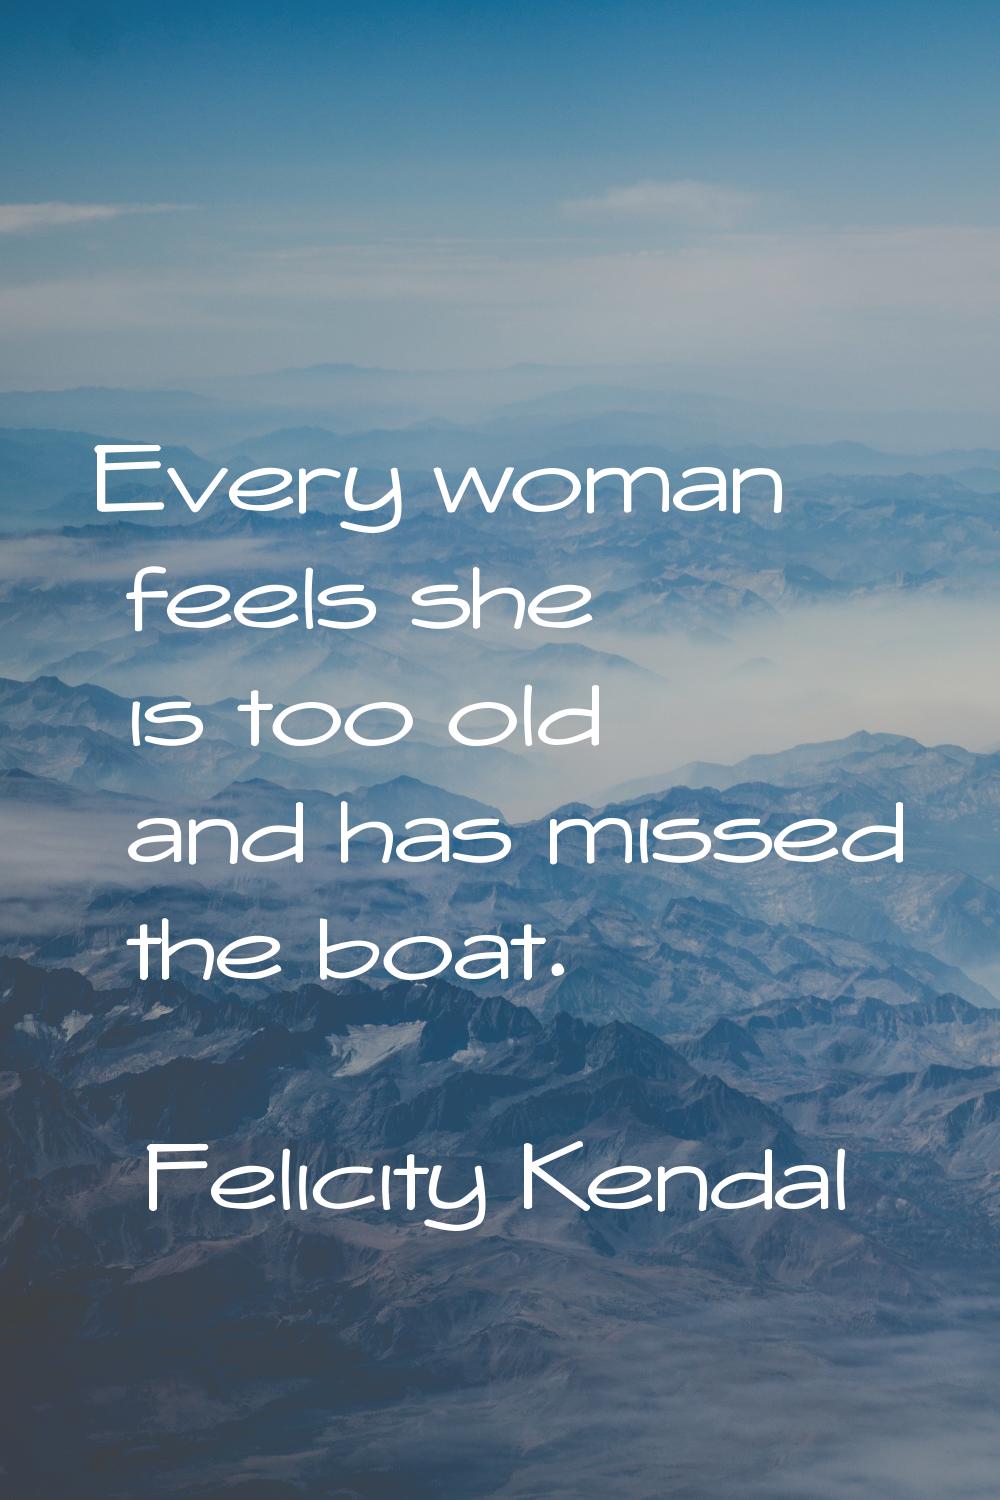 Every woman feels she is too old and has missed the boat.